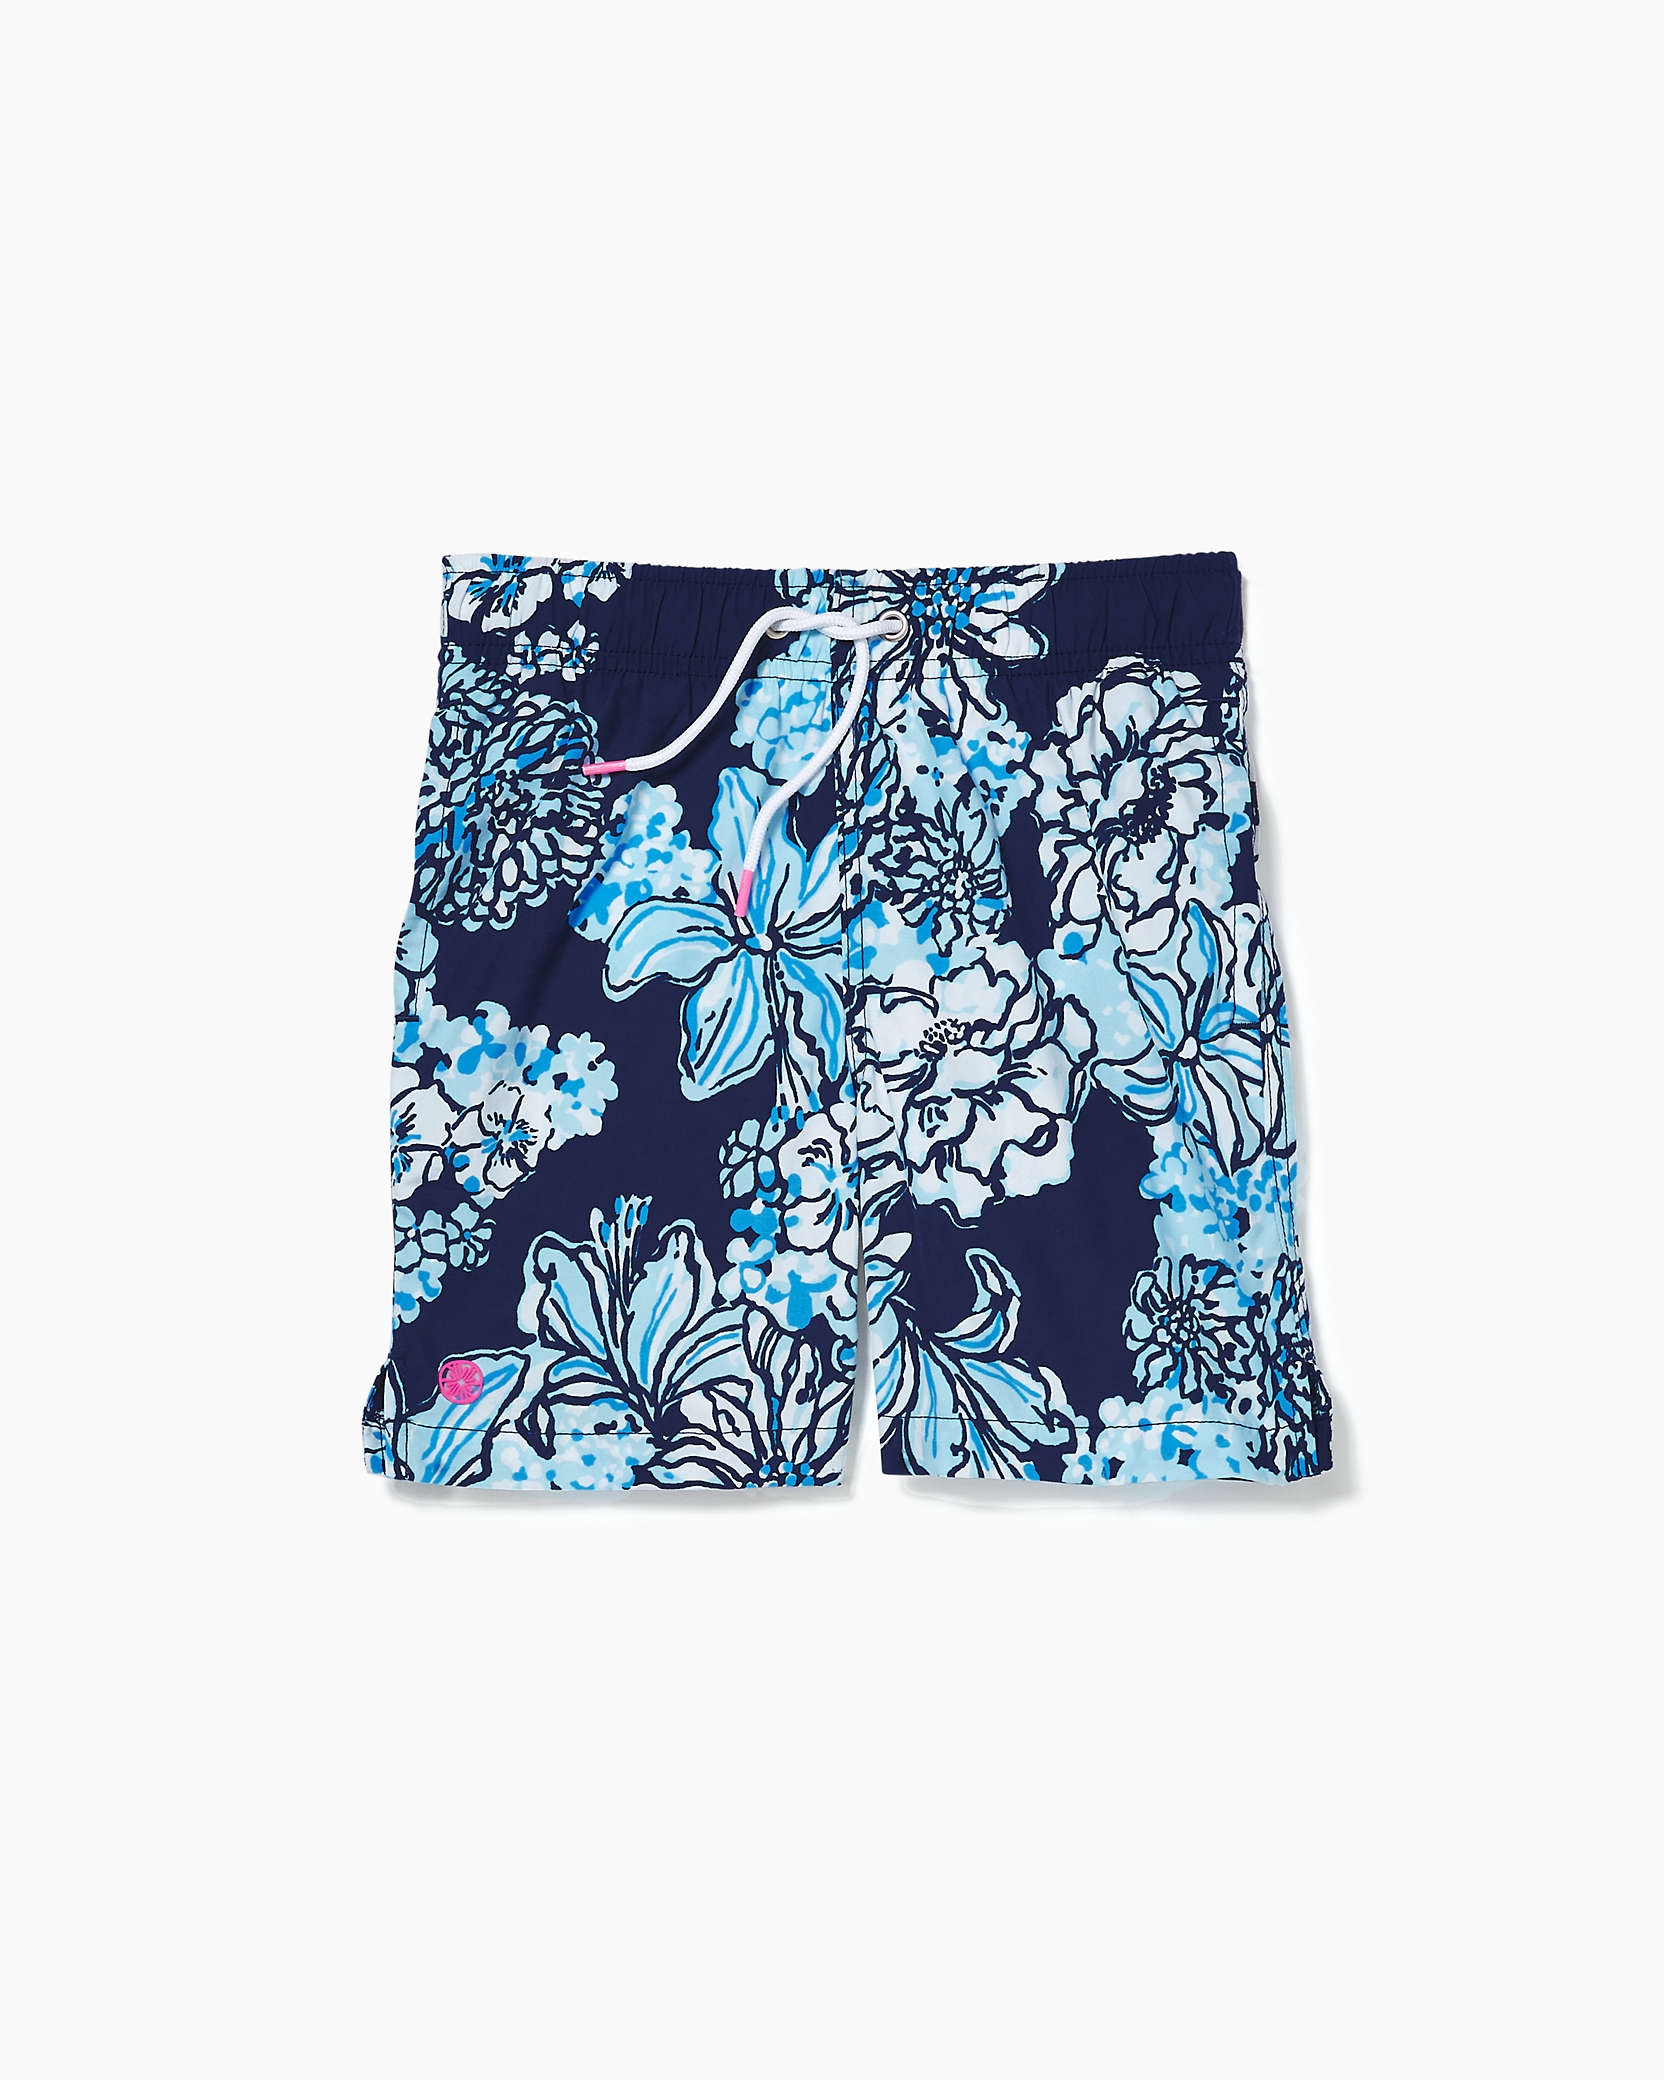 Shop Lilly Pulitzer Boys Junior Capri Swim Trunks In Low Tide Navy Bouquet All Day